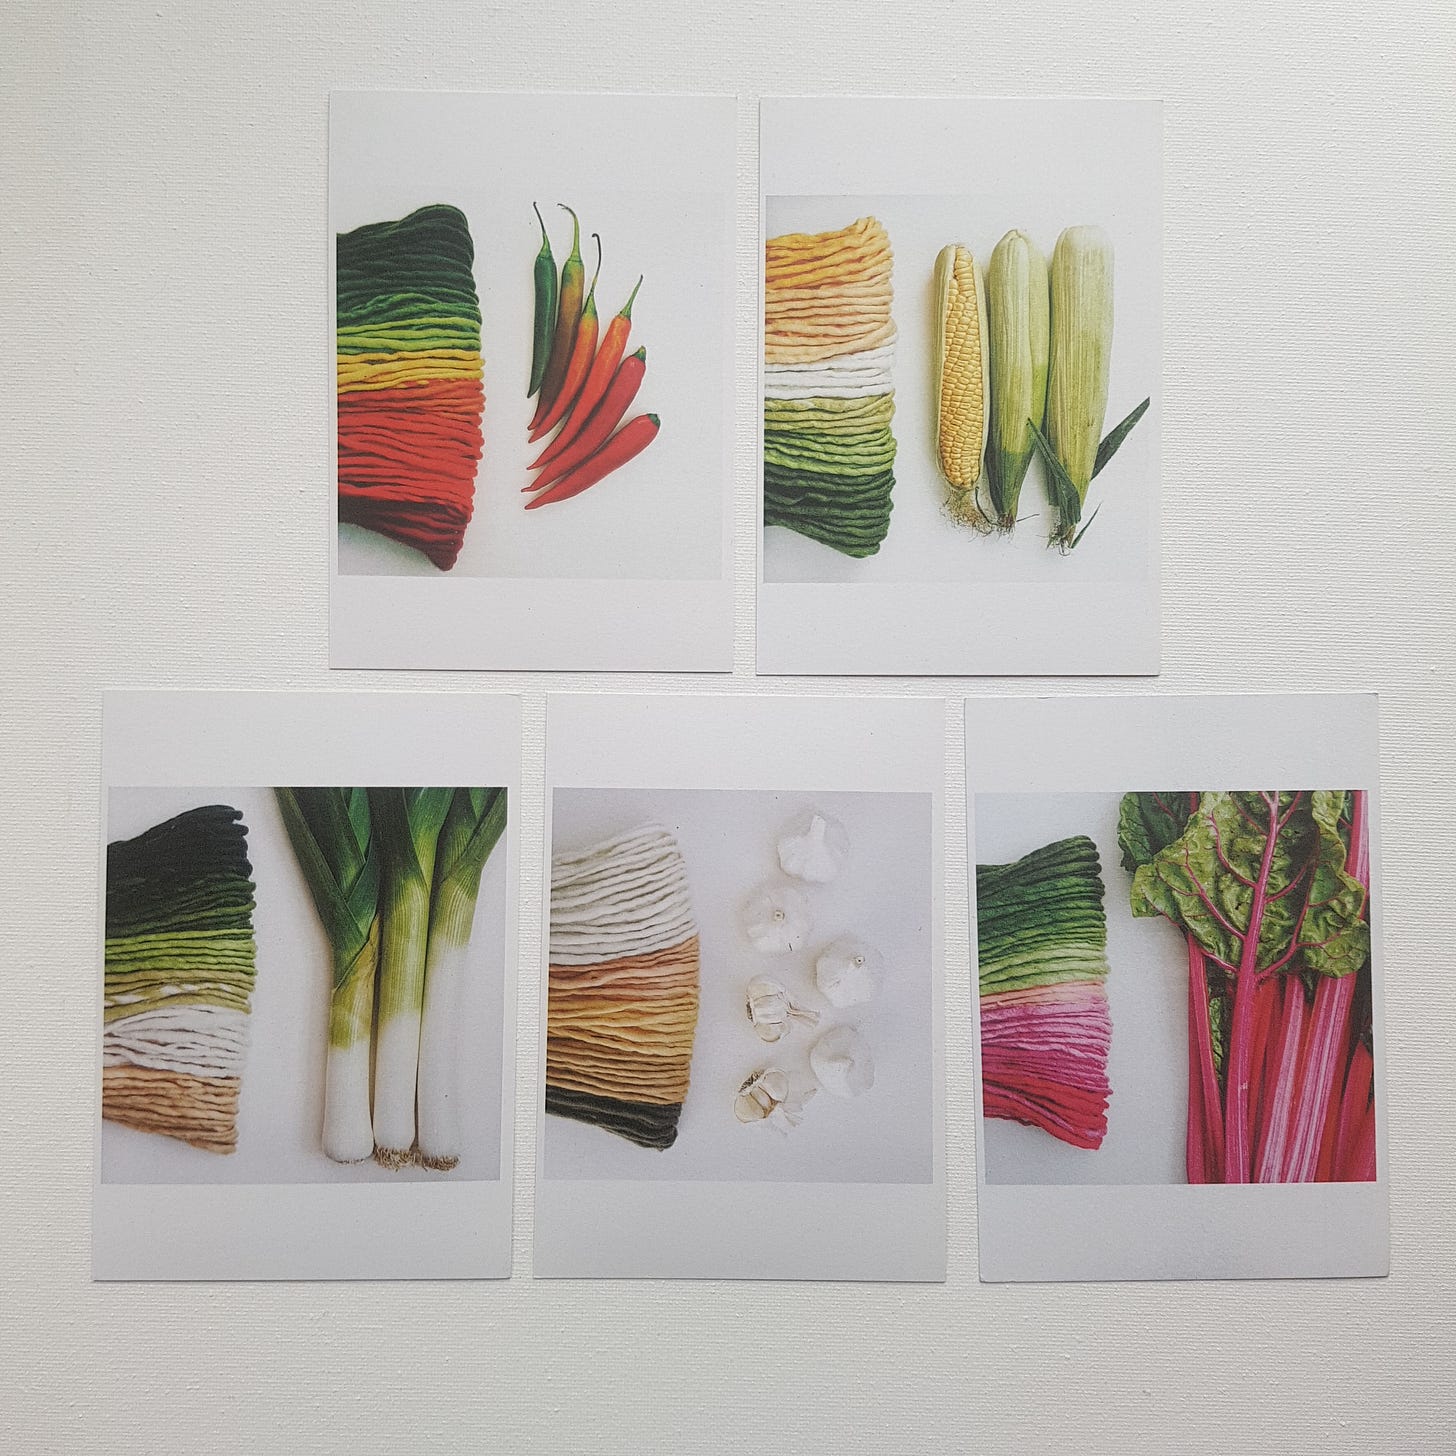 Five postcards of kitting and fruit arranged on a white desk.